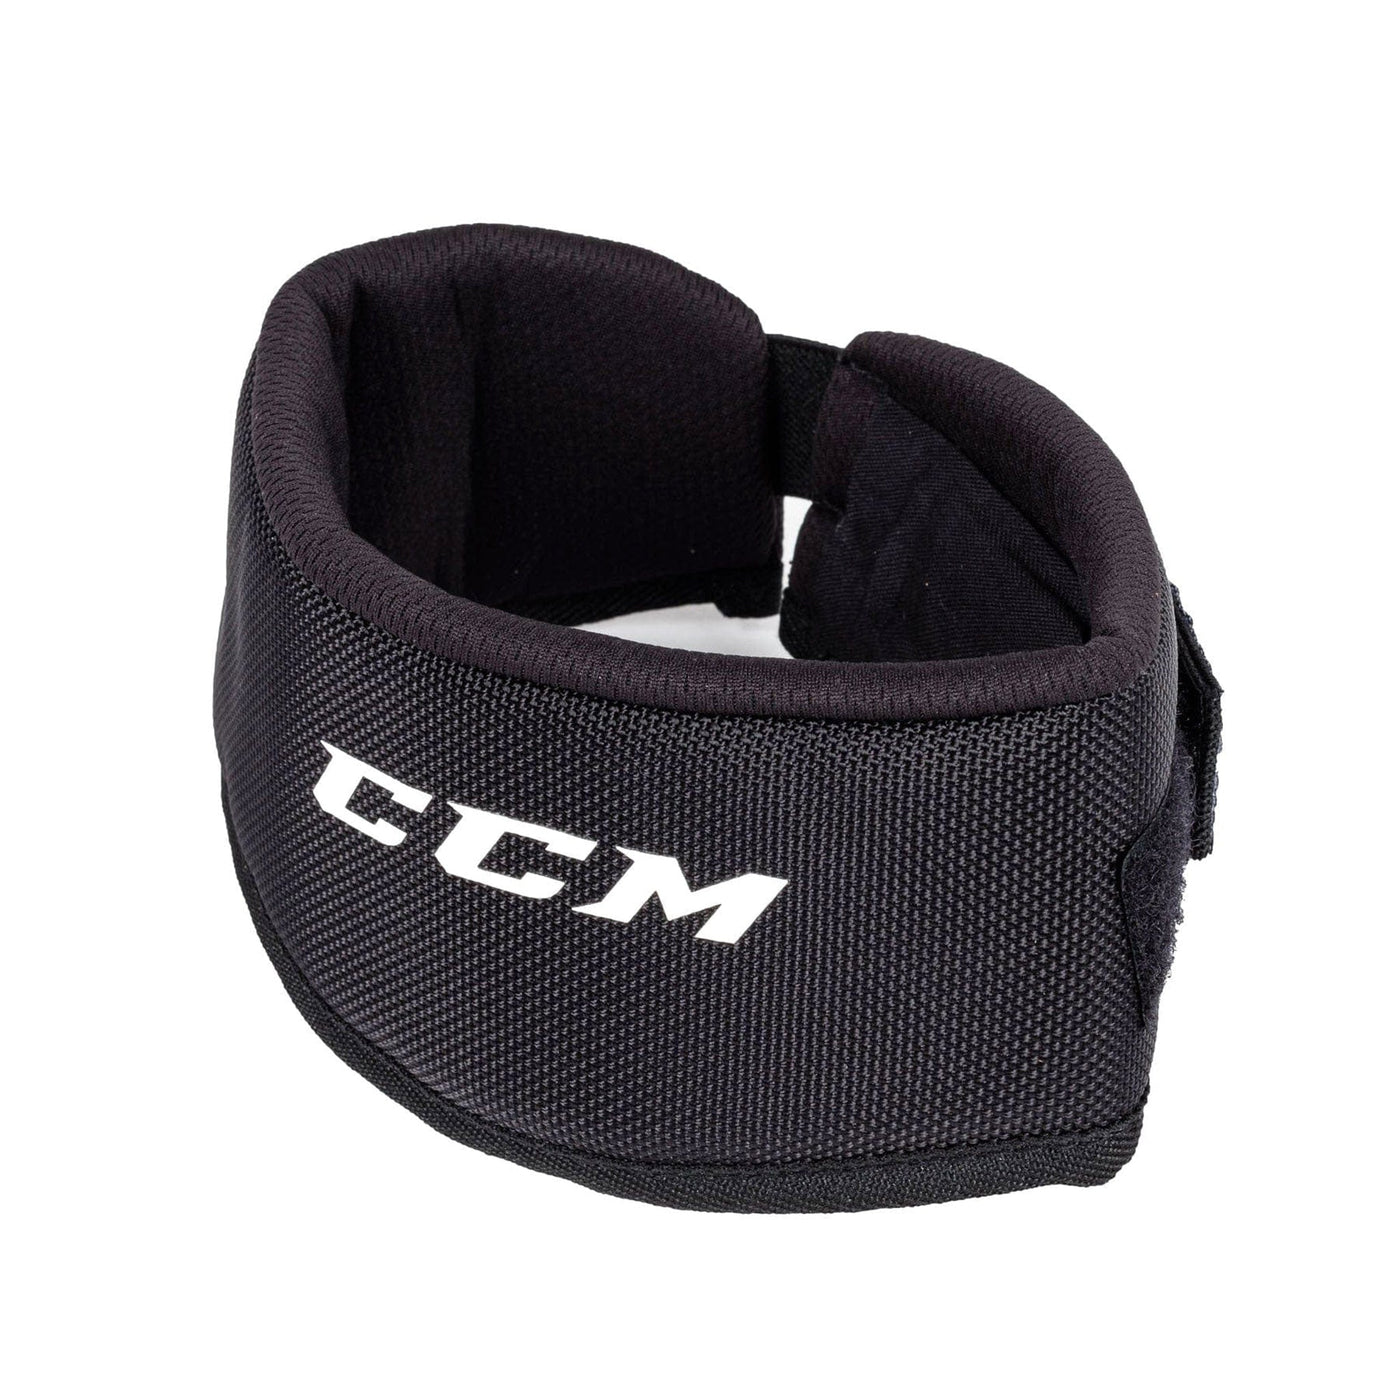 CCM 600 Cut Resistant Youth Neck Guard - The Hockey Shop Source For Sports